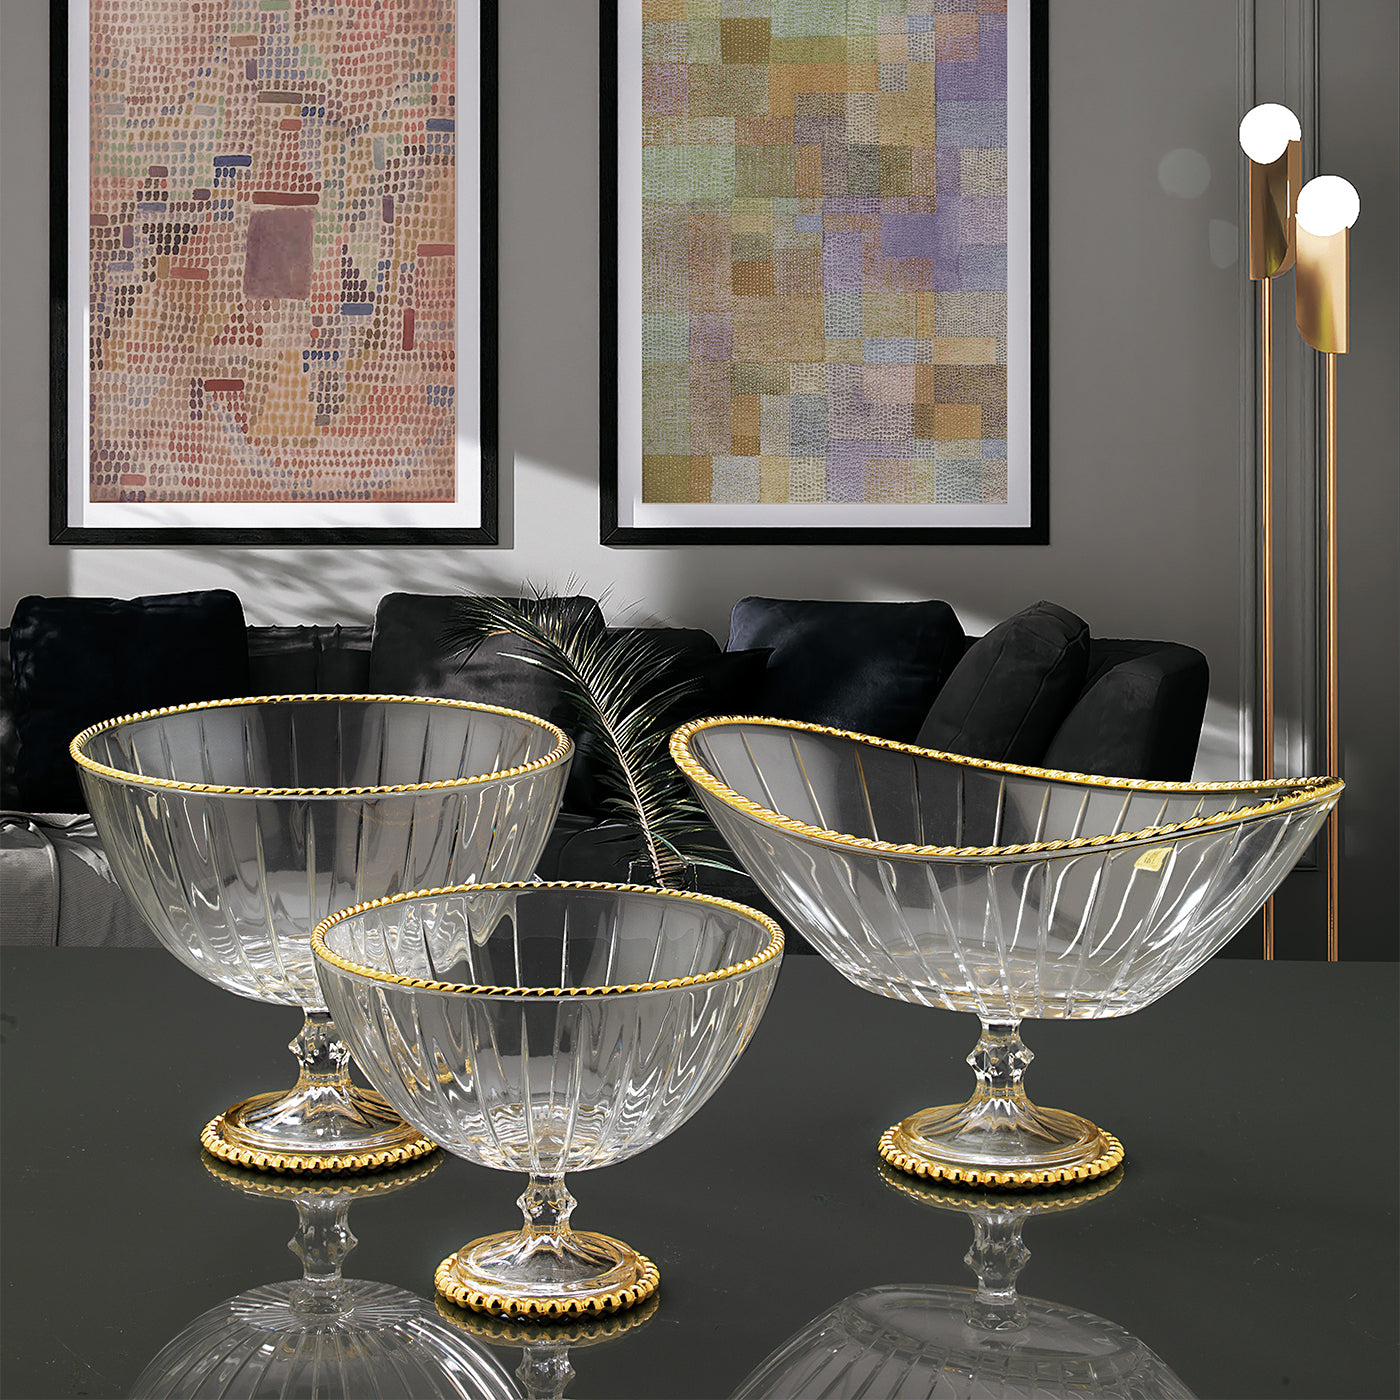 Accademia Glass Centerpiece with 24K Gold - Alternative view 1